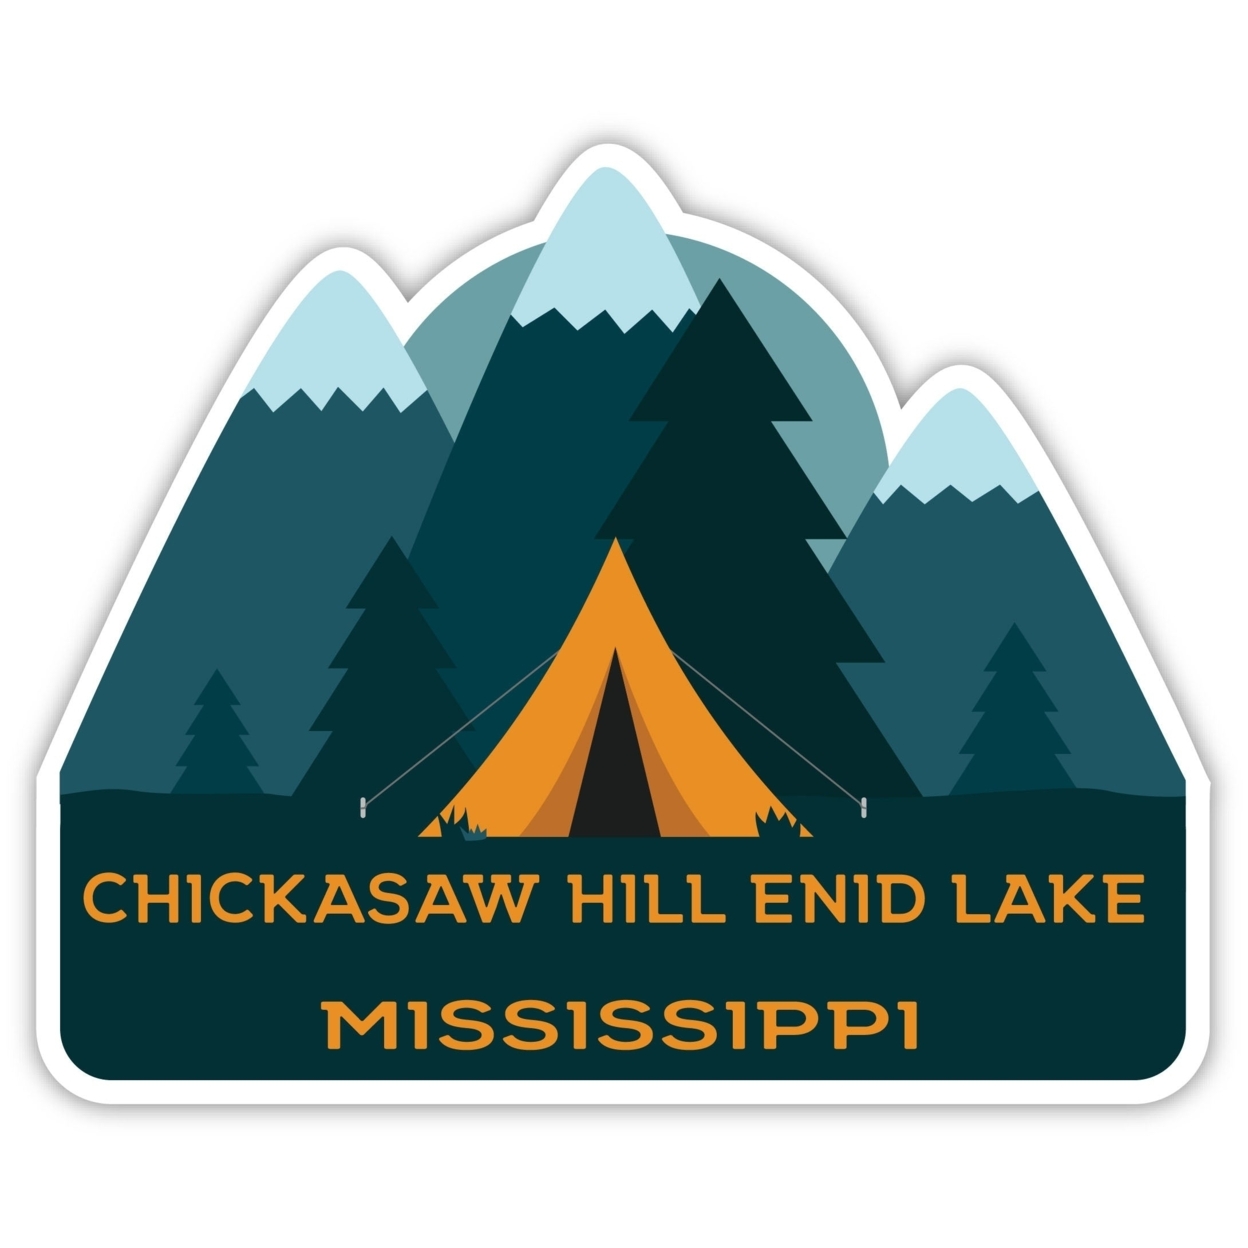 Chickasaw Hill Enid Lake Mississippi Souvenir Decorative Stickers (Choose Theme And Size) - 4-Pack, 6-Inch, Tent